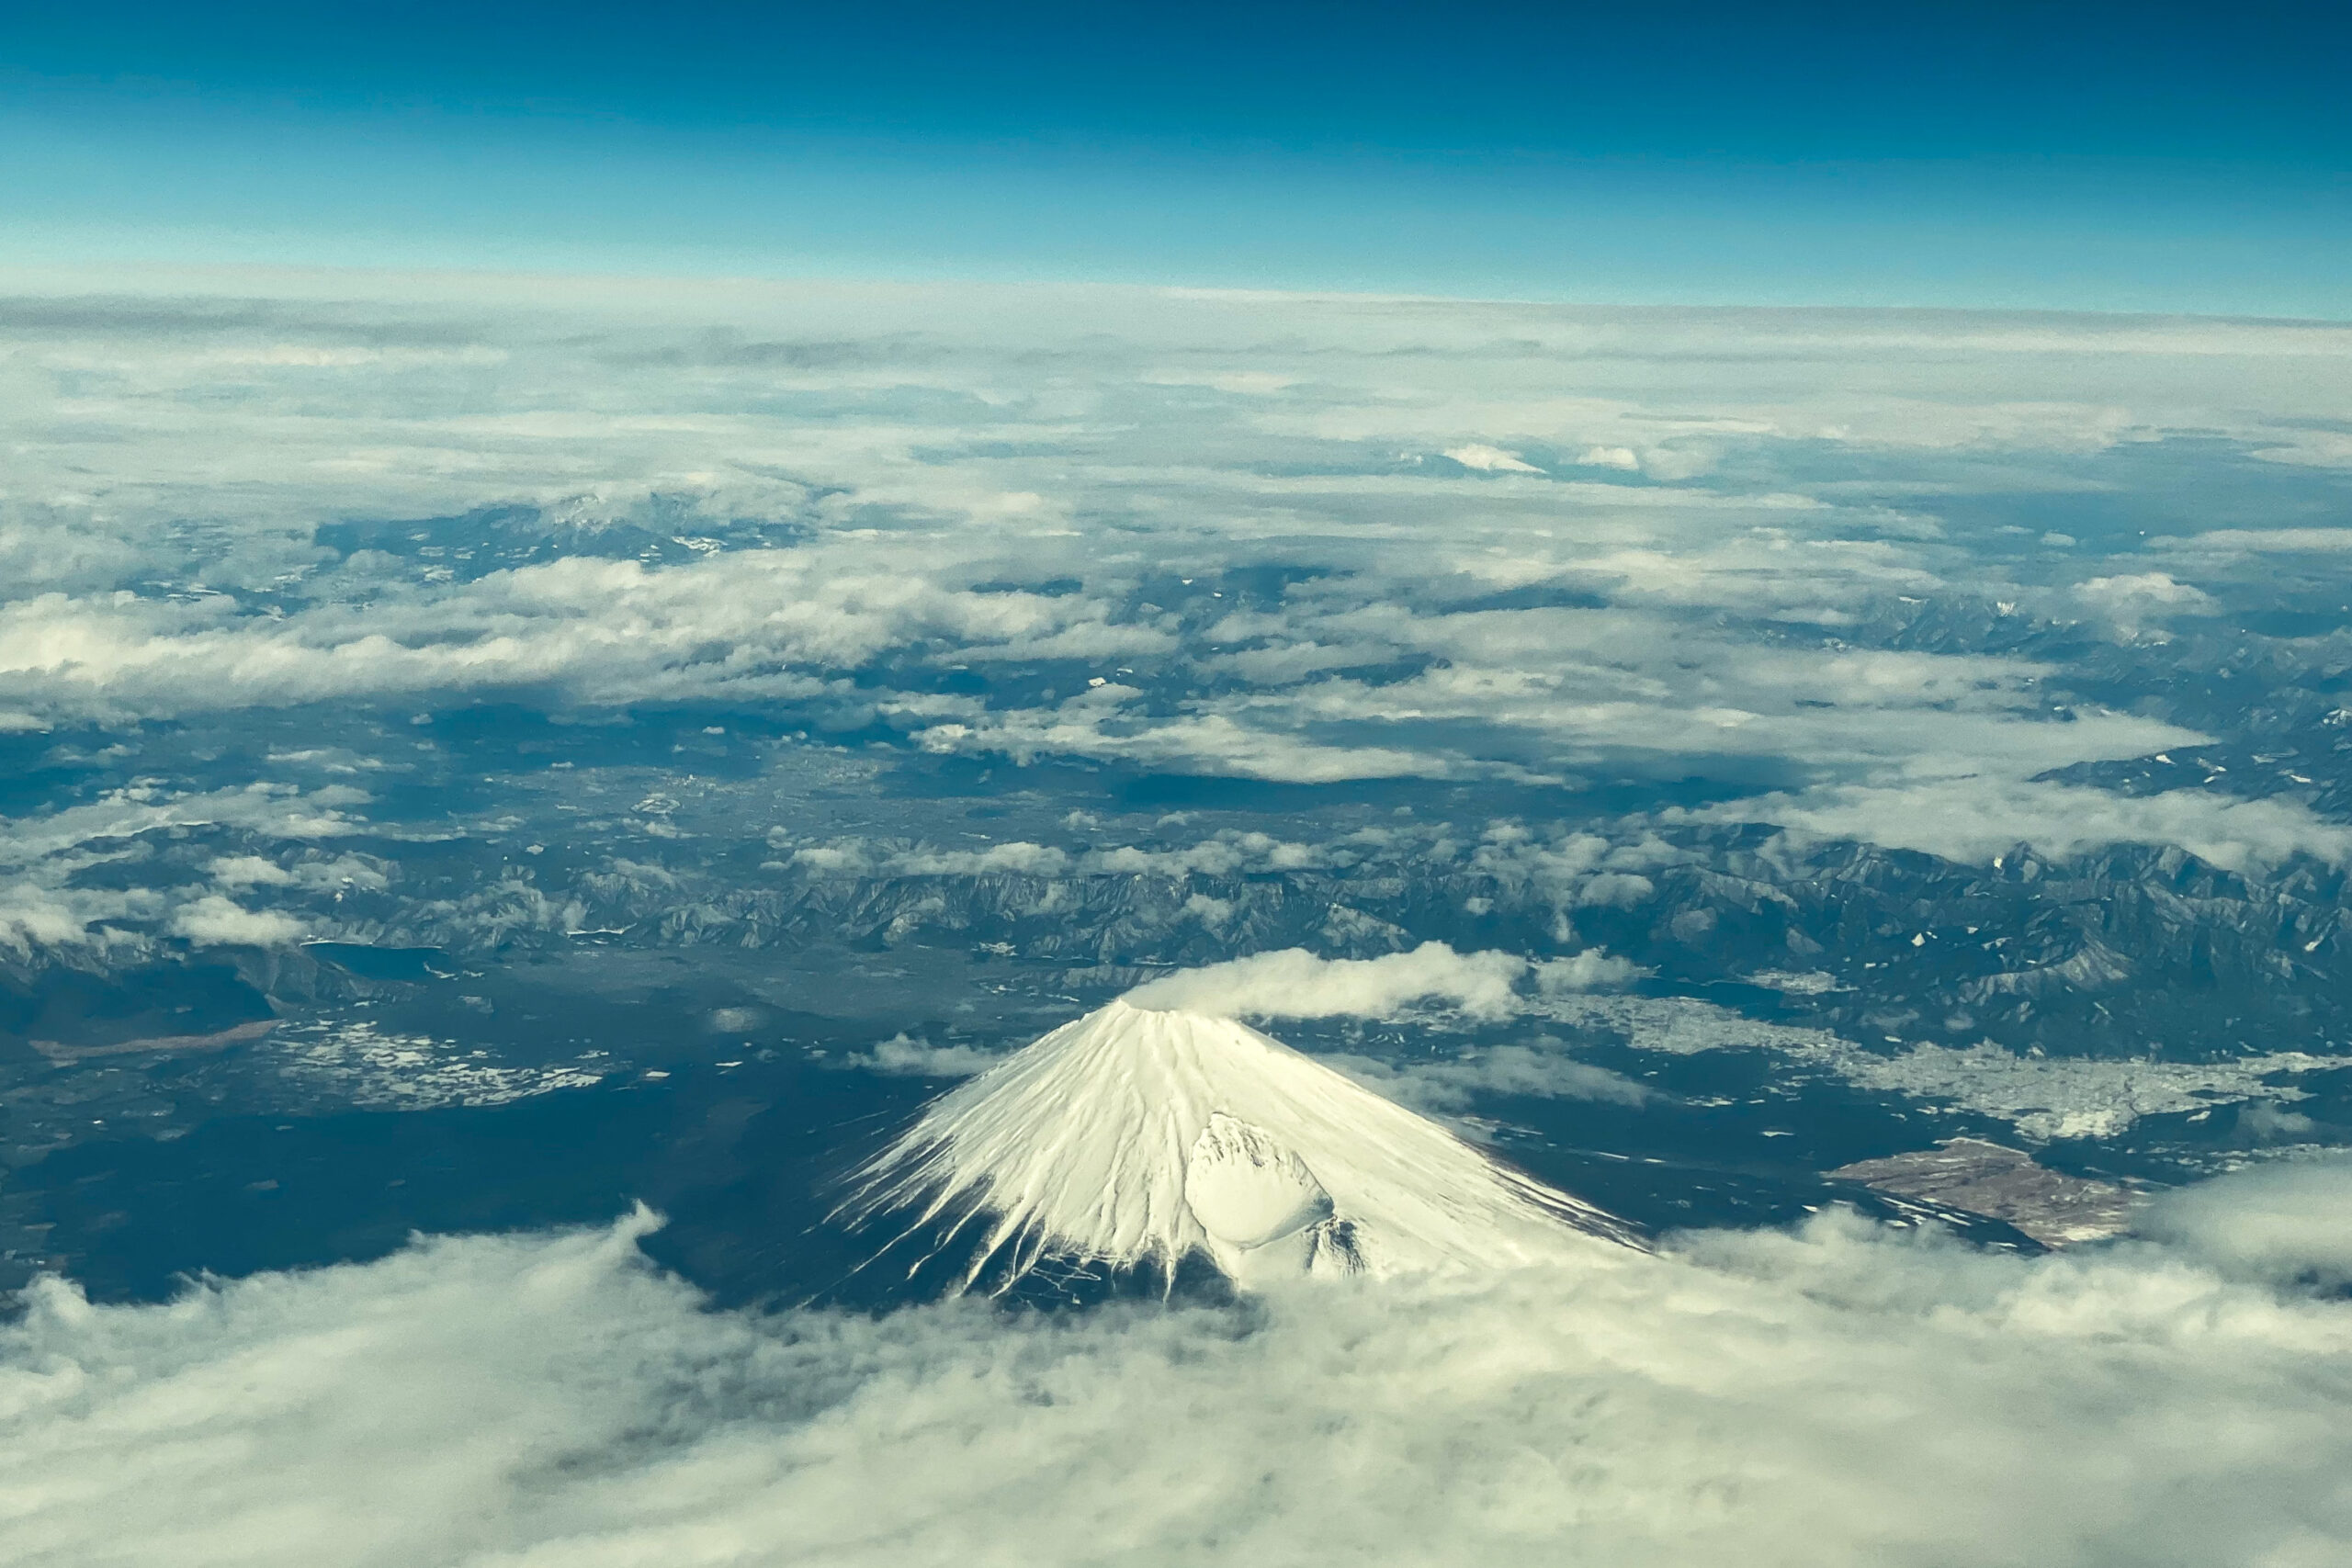 Climbers to pay $13 fee on popular Mount Fuji trail